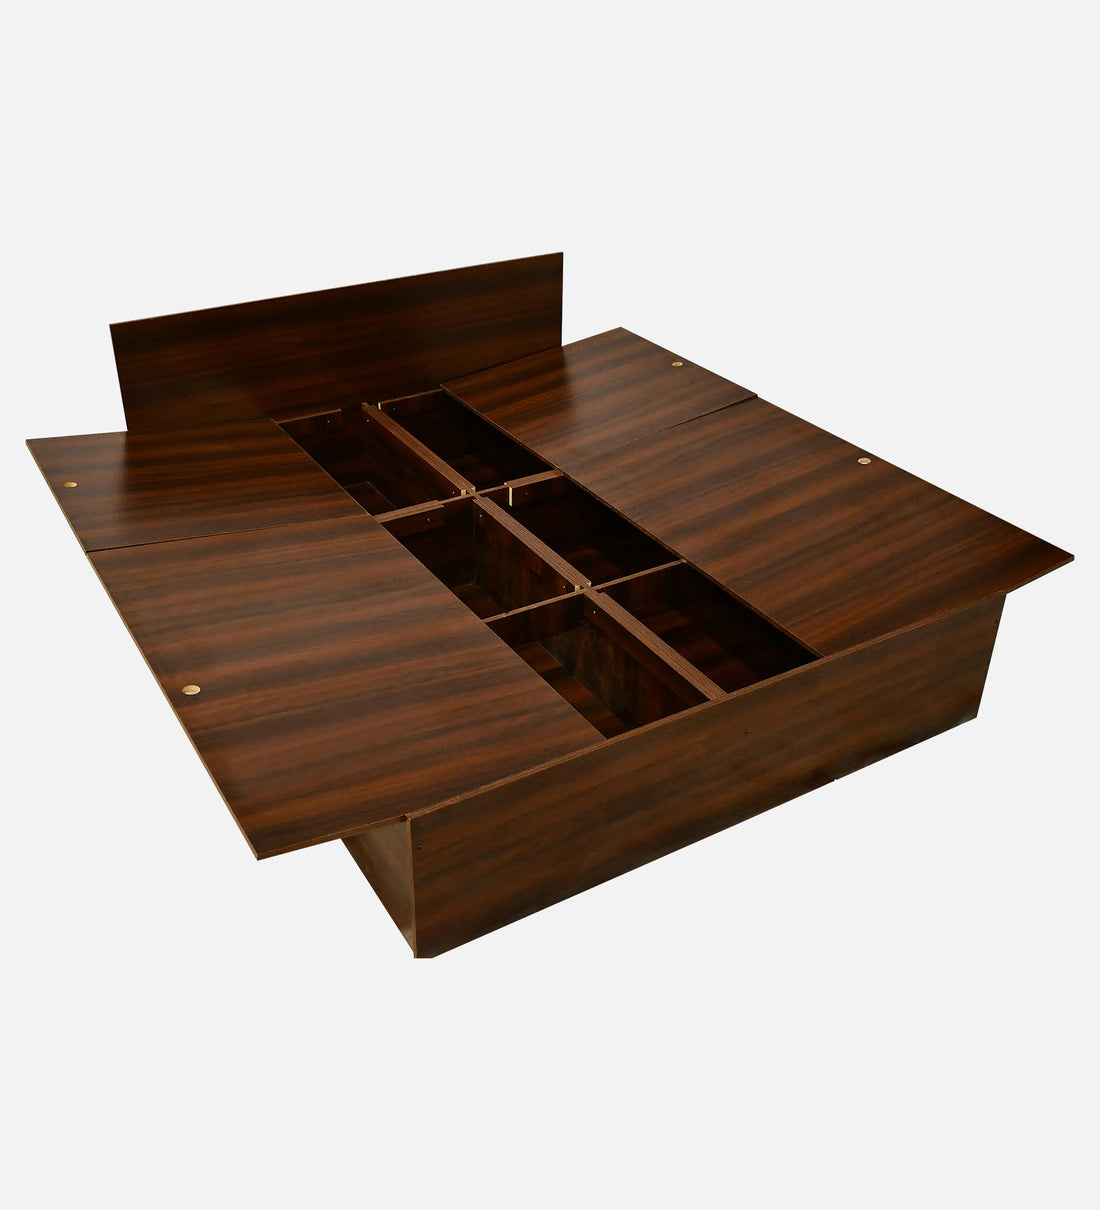 King Size Bed in Virola Wood Finish with Box Storage